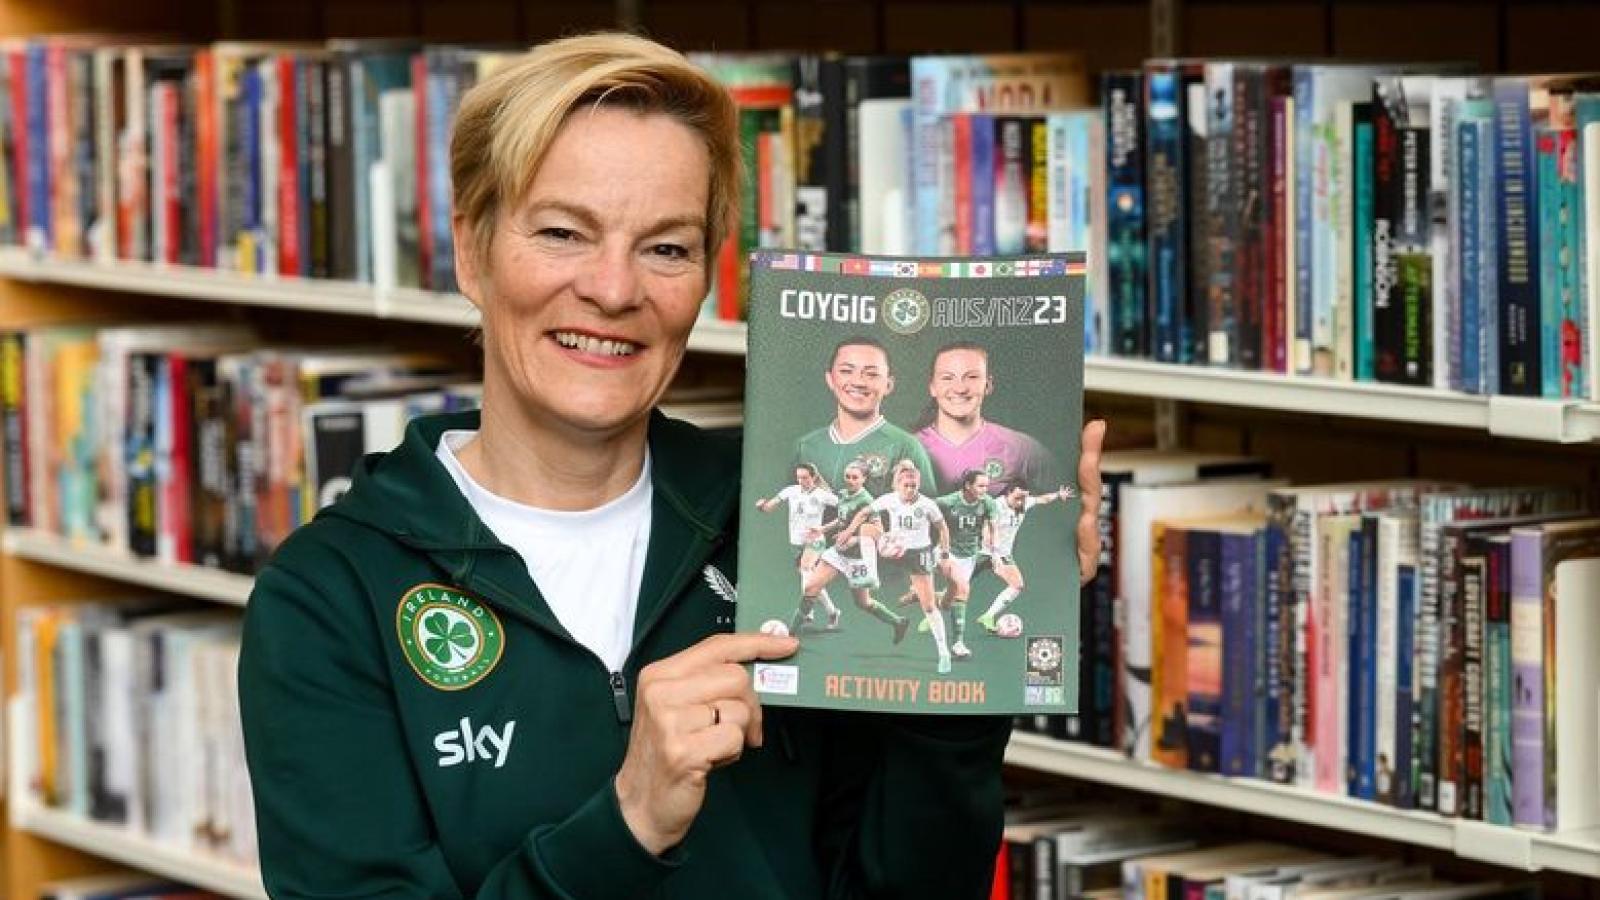 Vera Pauw holds FAI Activity book in front of library shelves